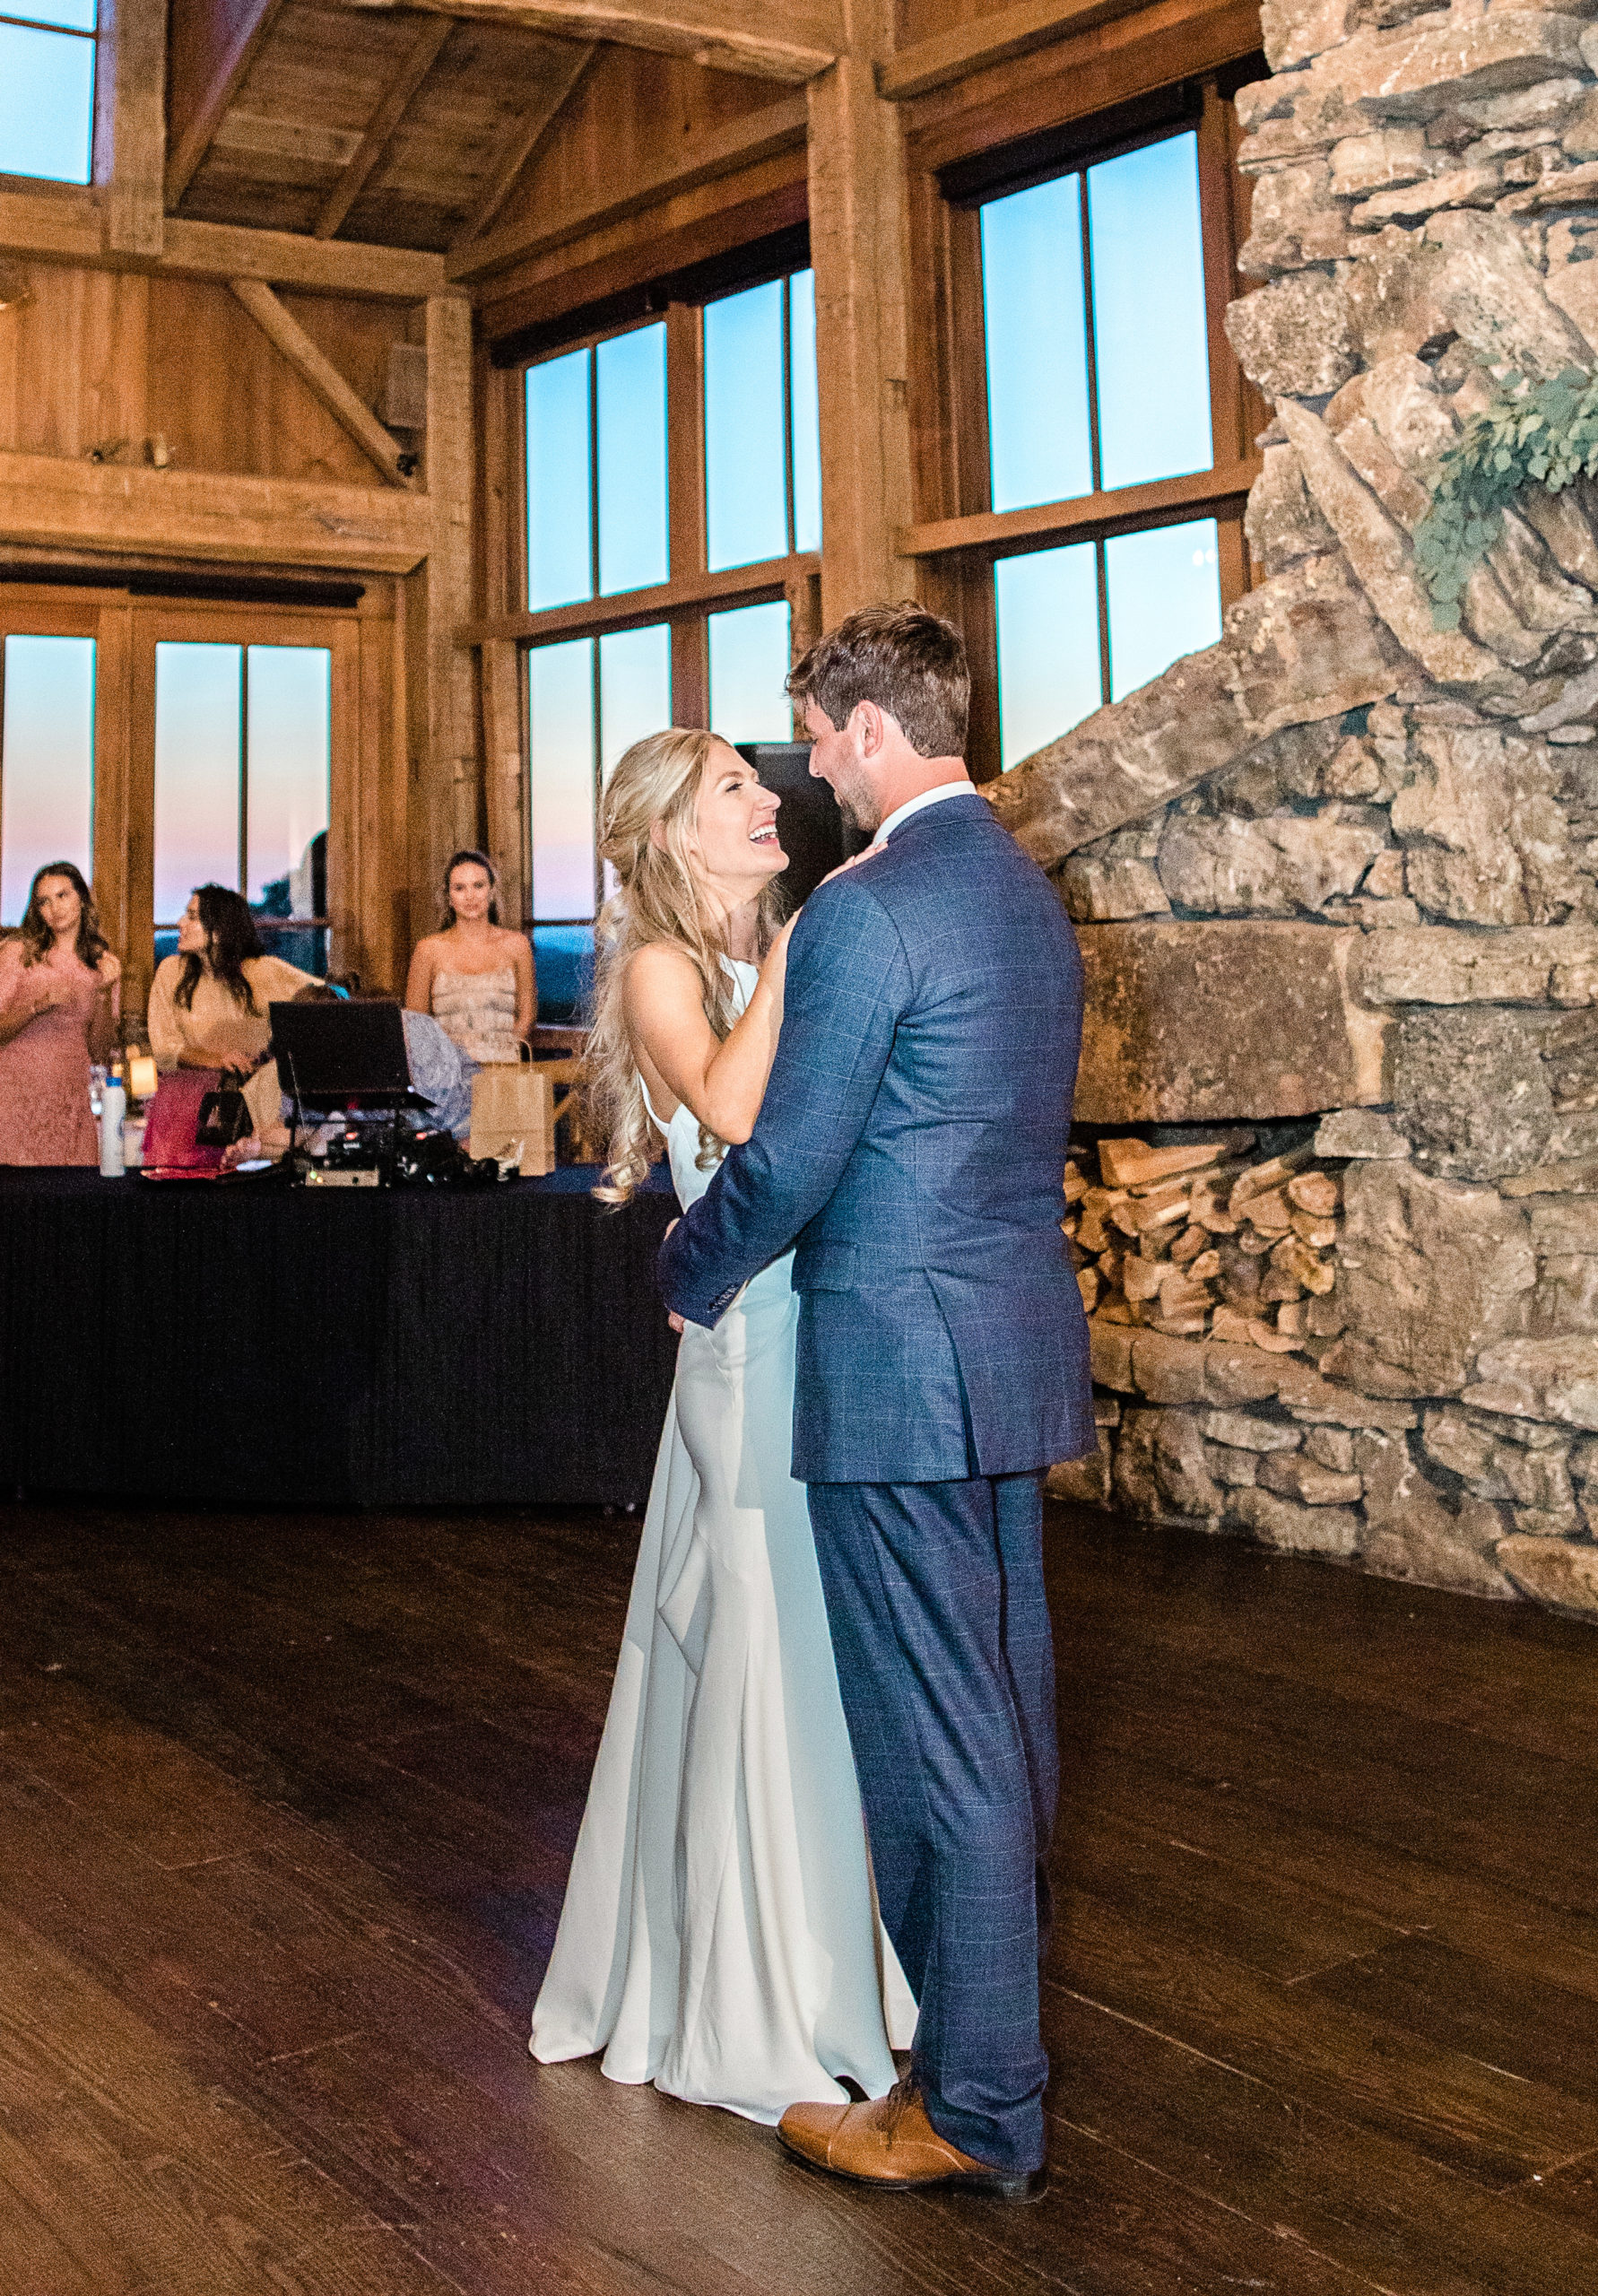 Bride and groom first dance at Annie's Barn, Top of the Rock wedding Venue photos taken by Tatyana Zadorin Photography